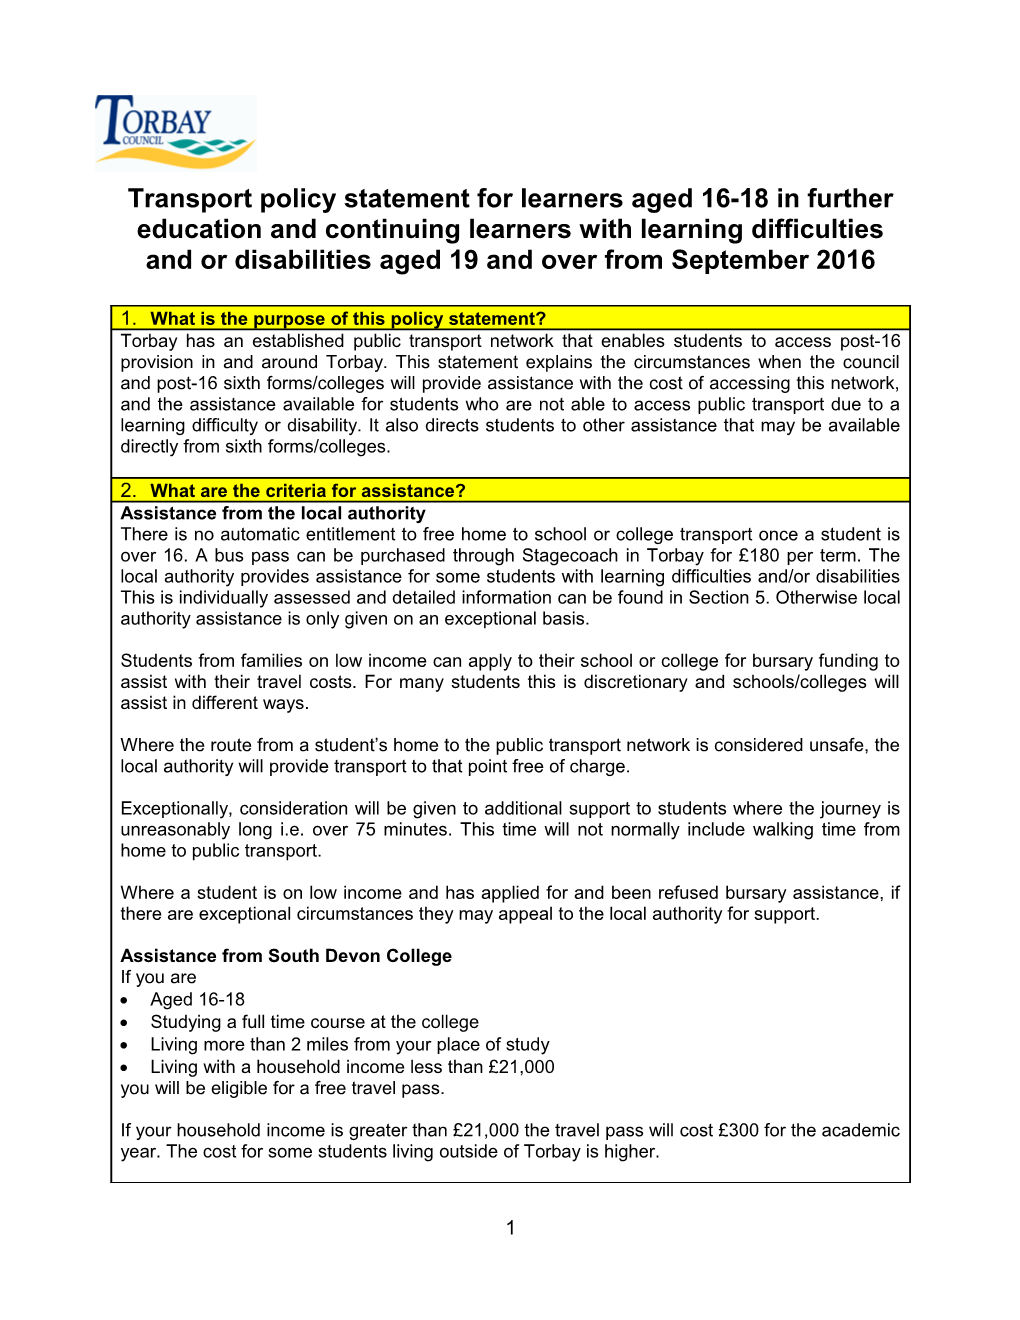 Transport Policy Statement for Learners Aged 16-18 in Further Education and Continuing